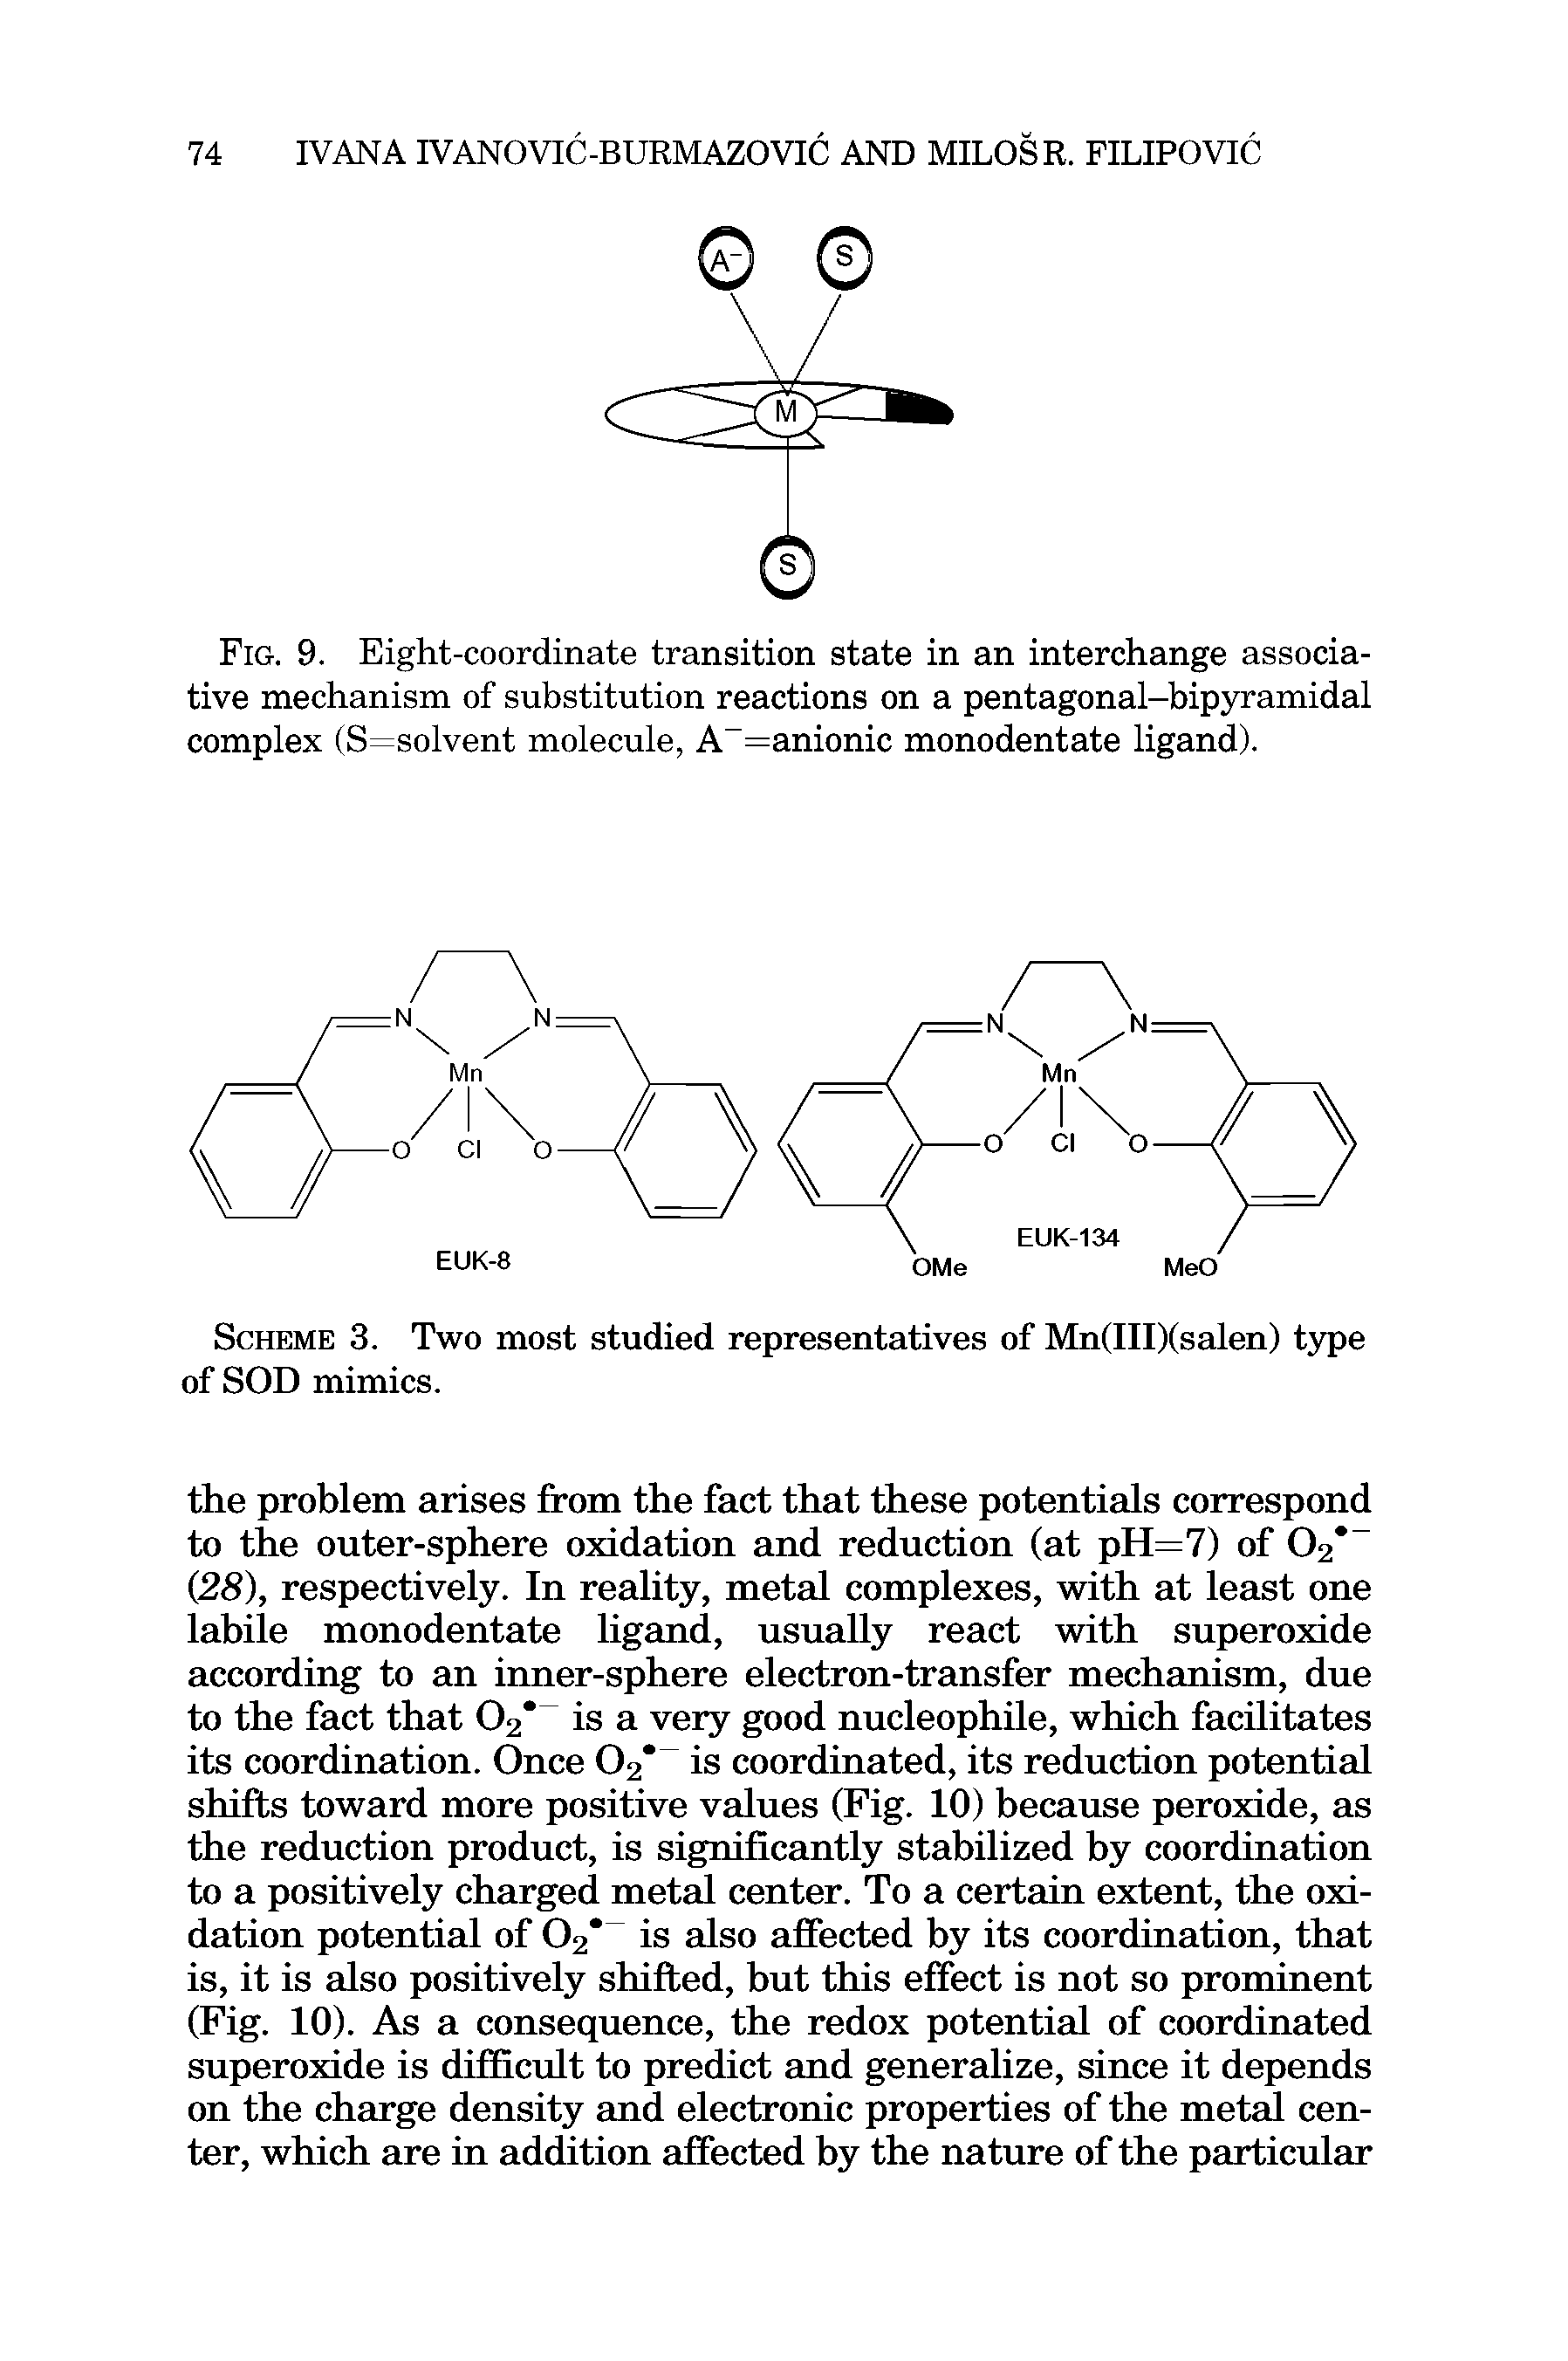 Fig. 9. Eight-coordinate transition state in an interchange associative mechanism of substitution reactions on a pentagonal-bipyramidal complex (S=solvent molecule, A =anionic monodentate ligand).